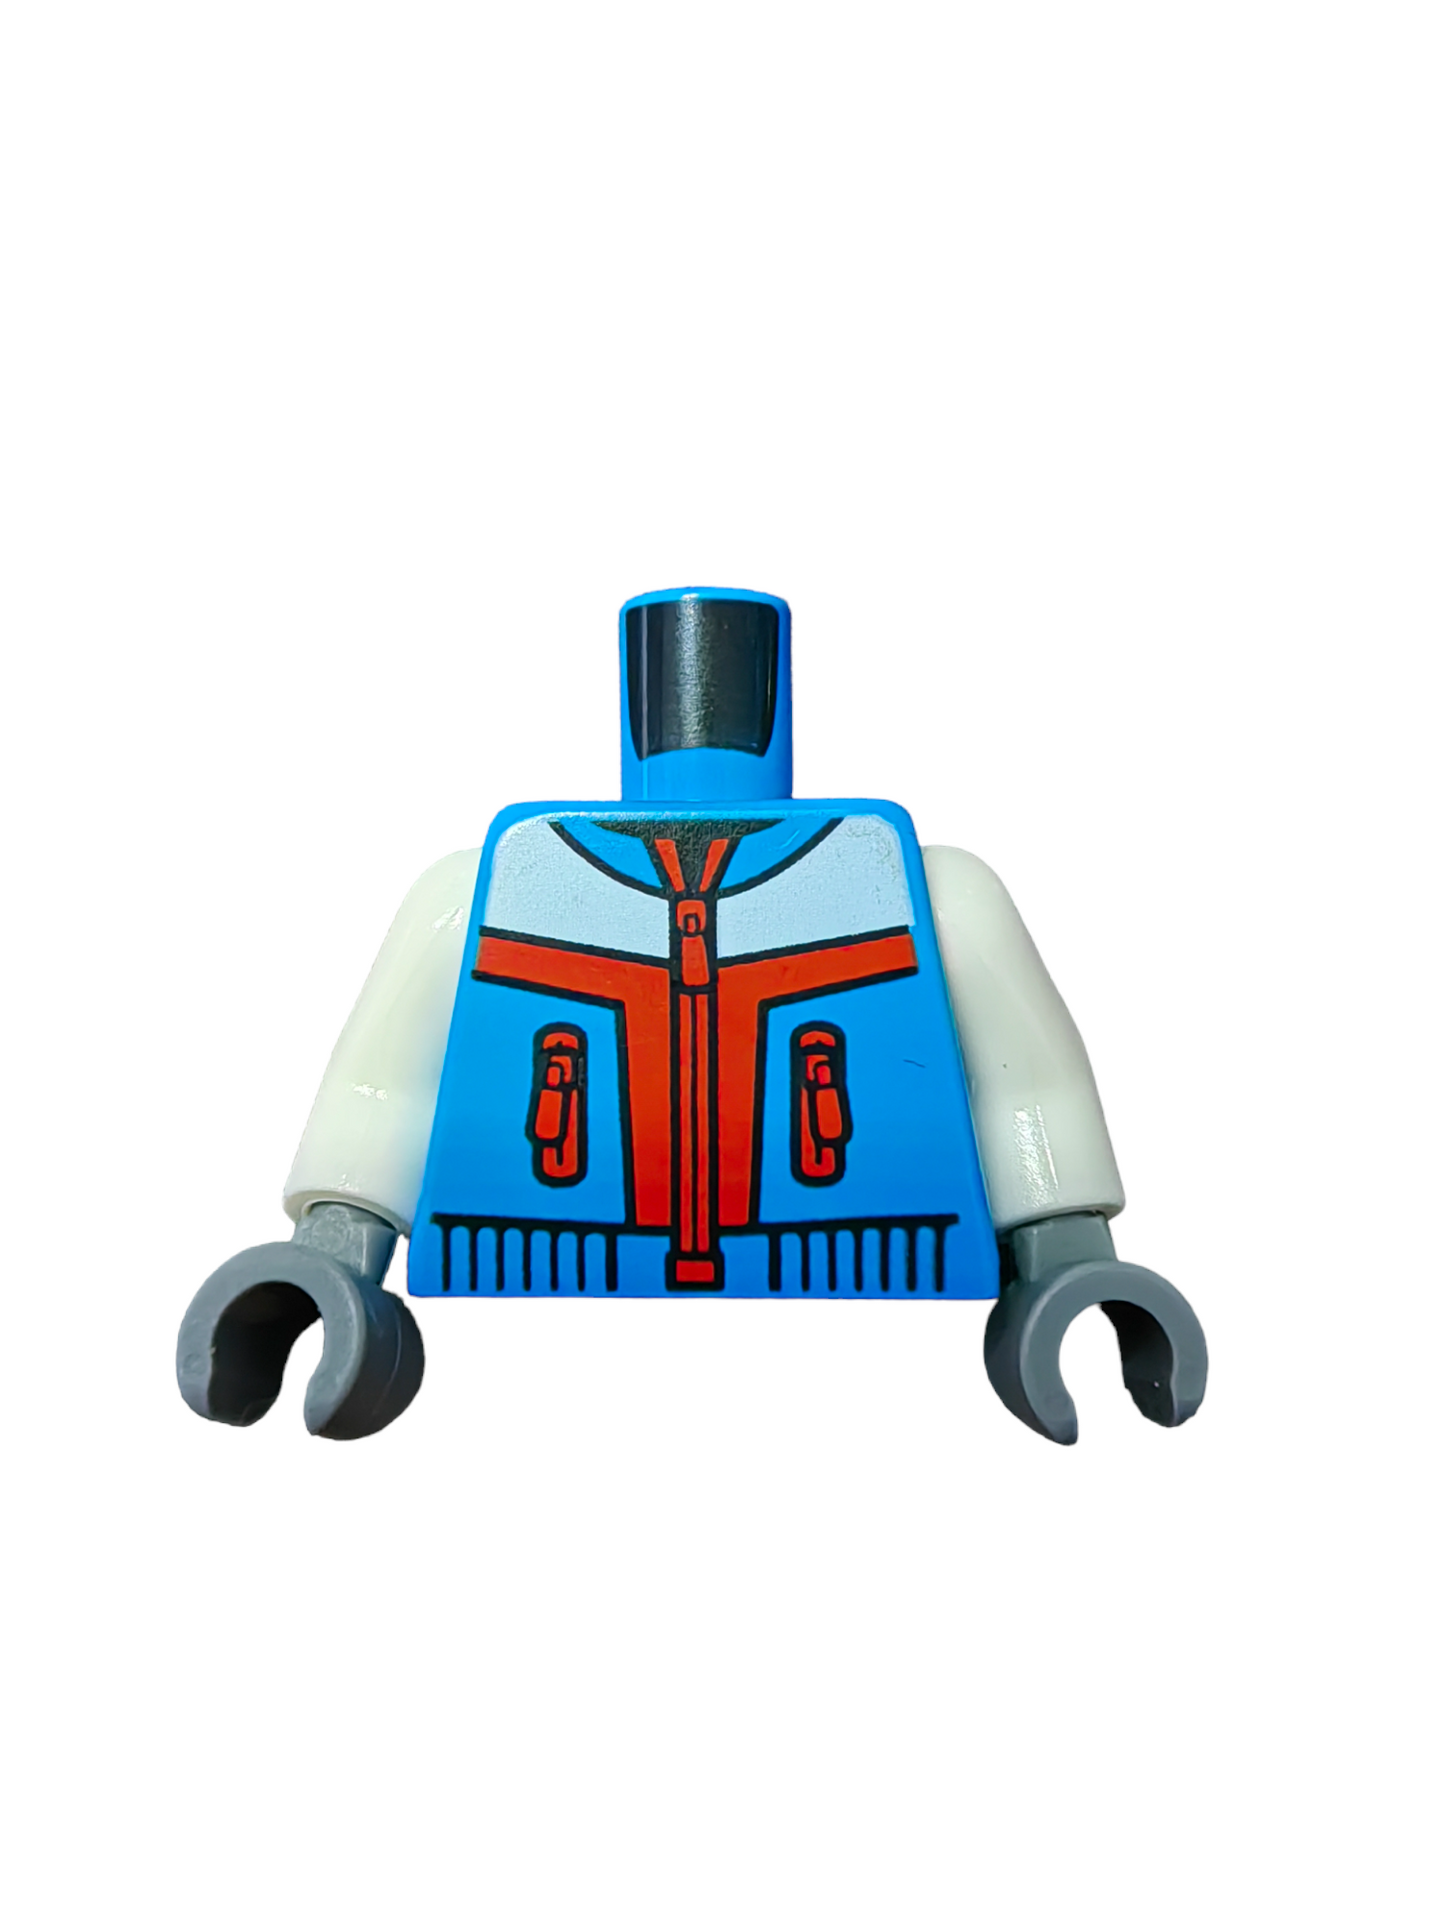 LEGO Torso, Jacket with Red Zippers and White Arms - UB1148